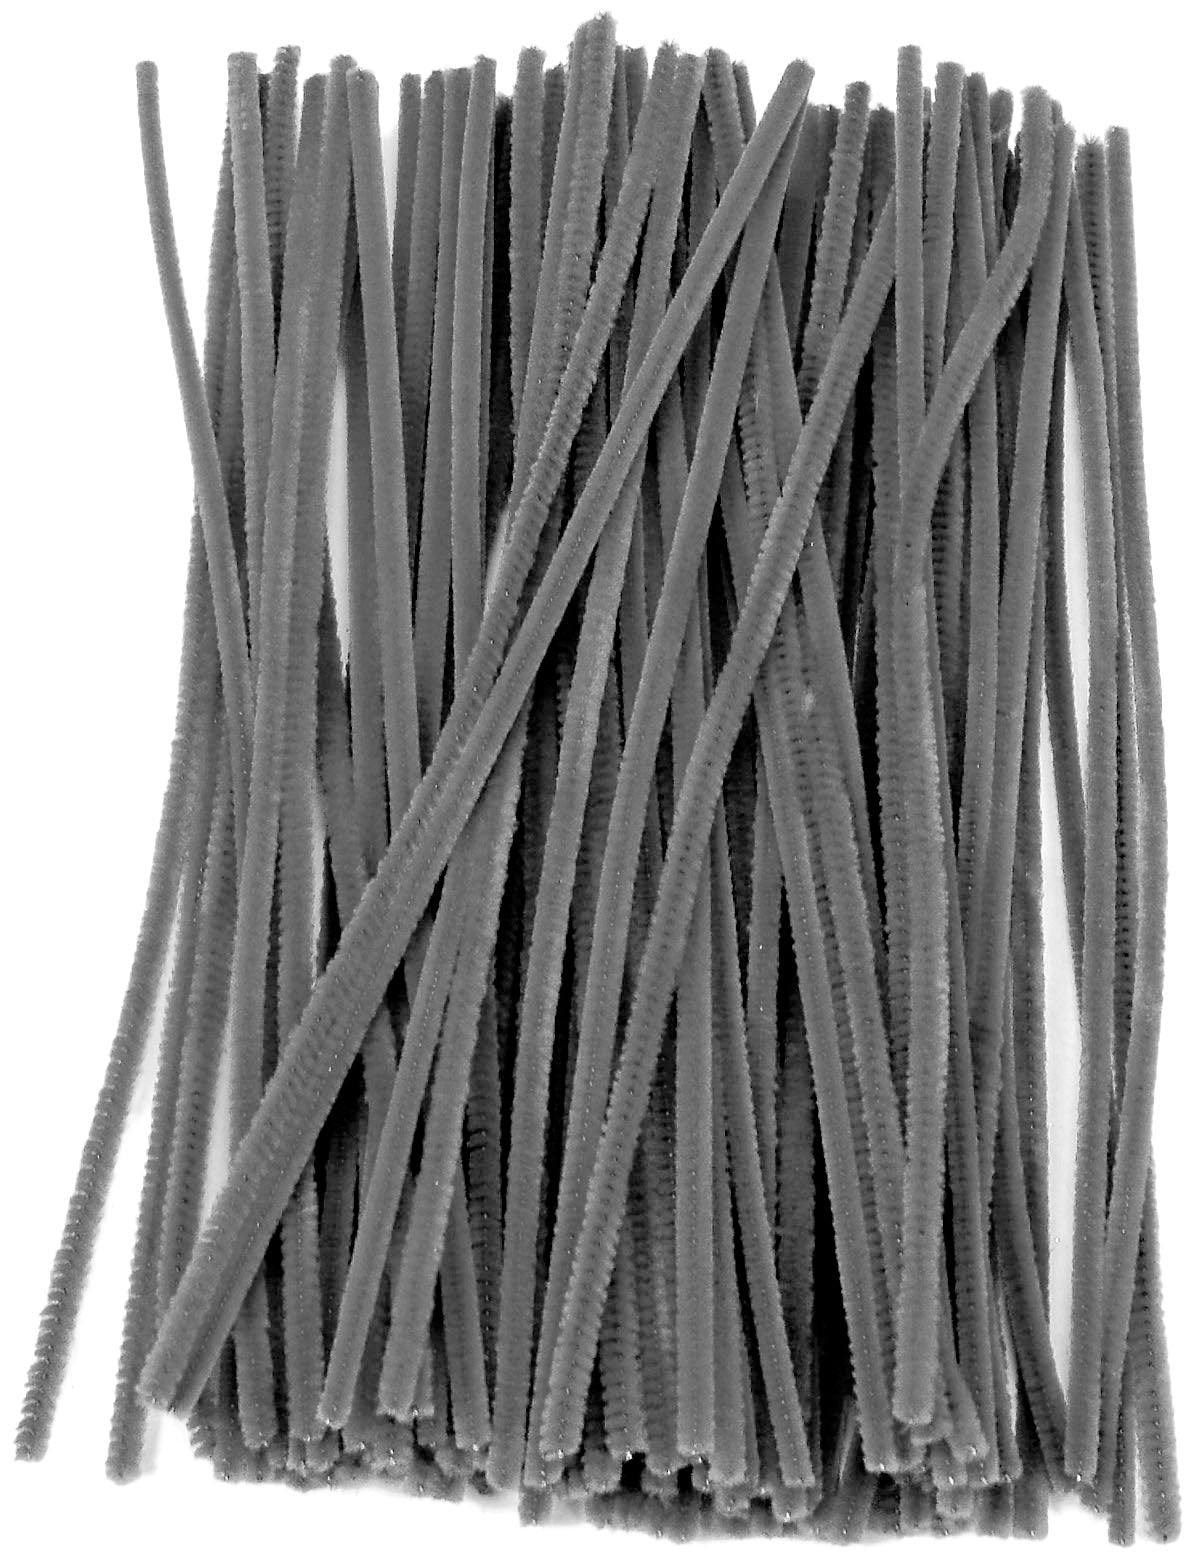 12" Pipe Cleaner Stems: 6mm Chenille Grey (100)